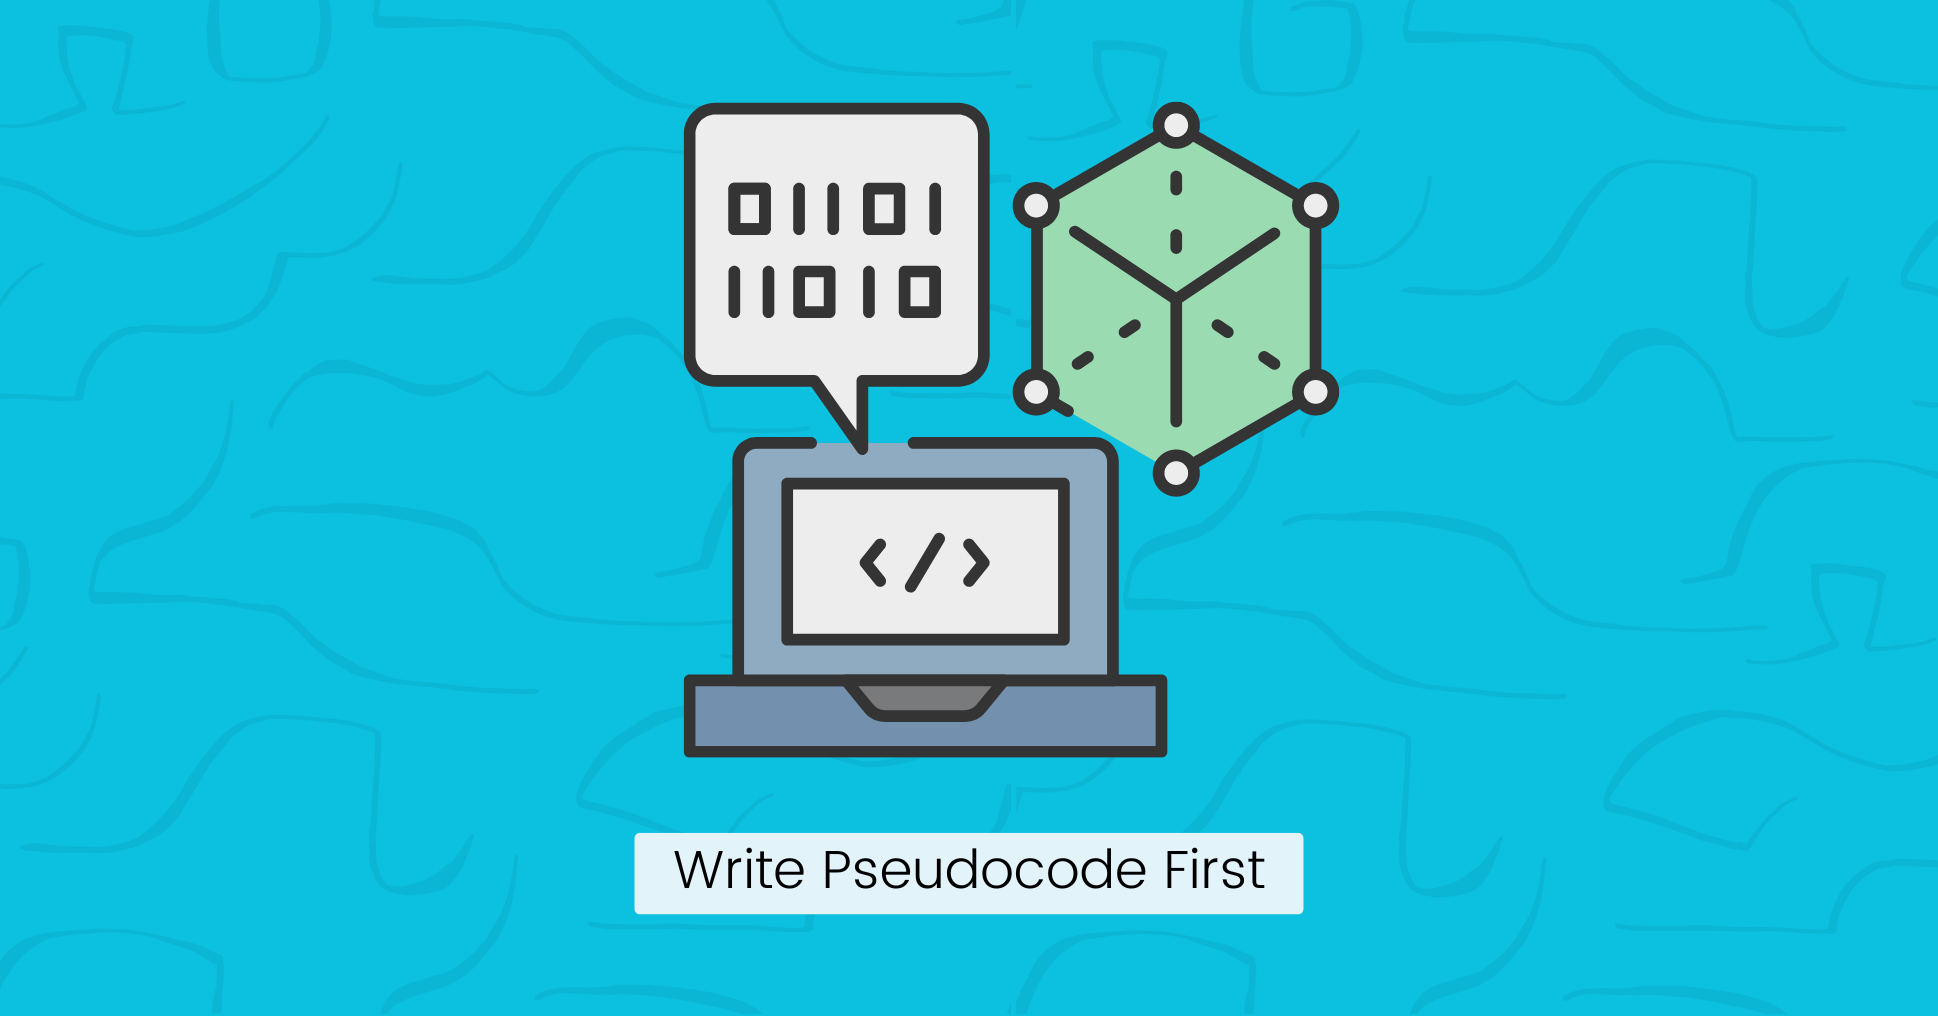 Write Pseudocode First